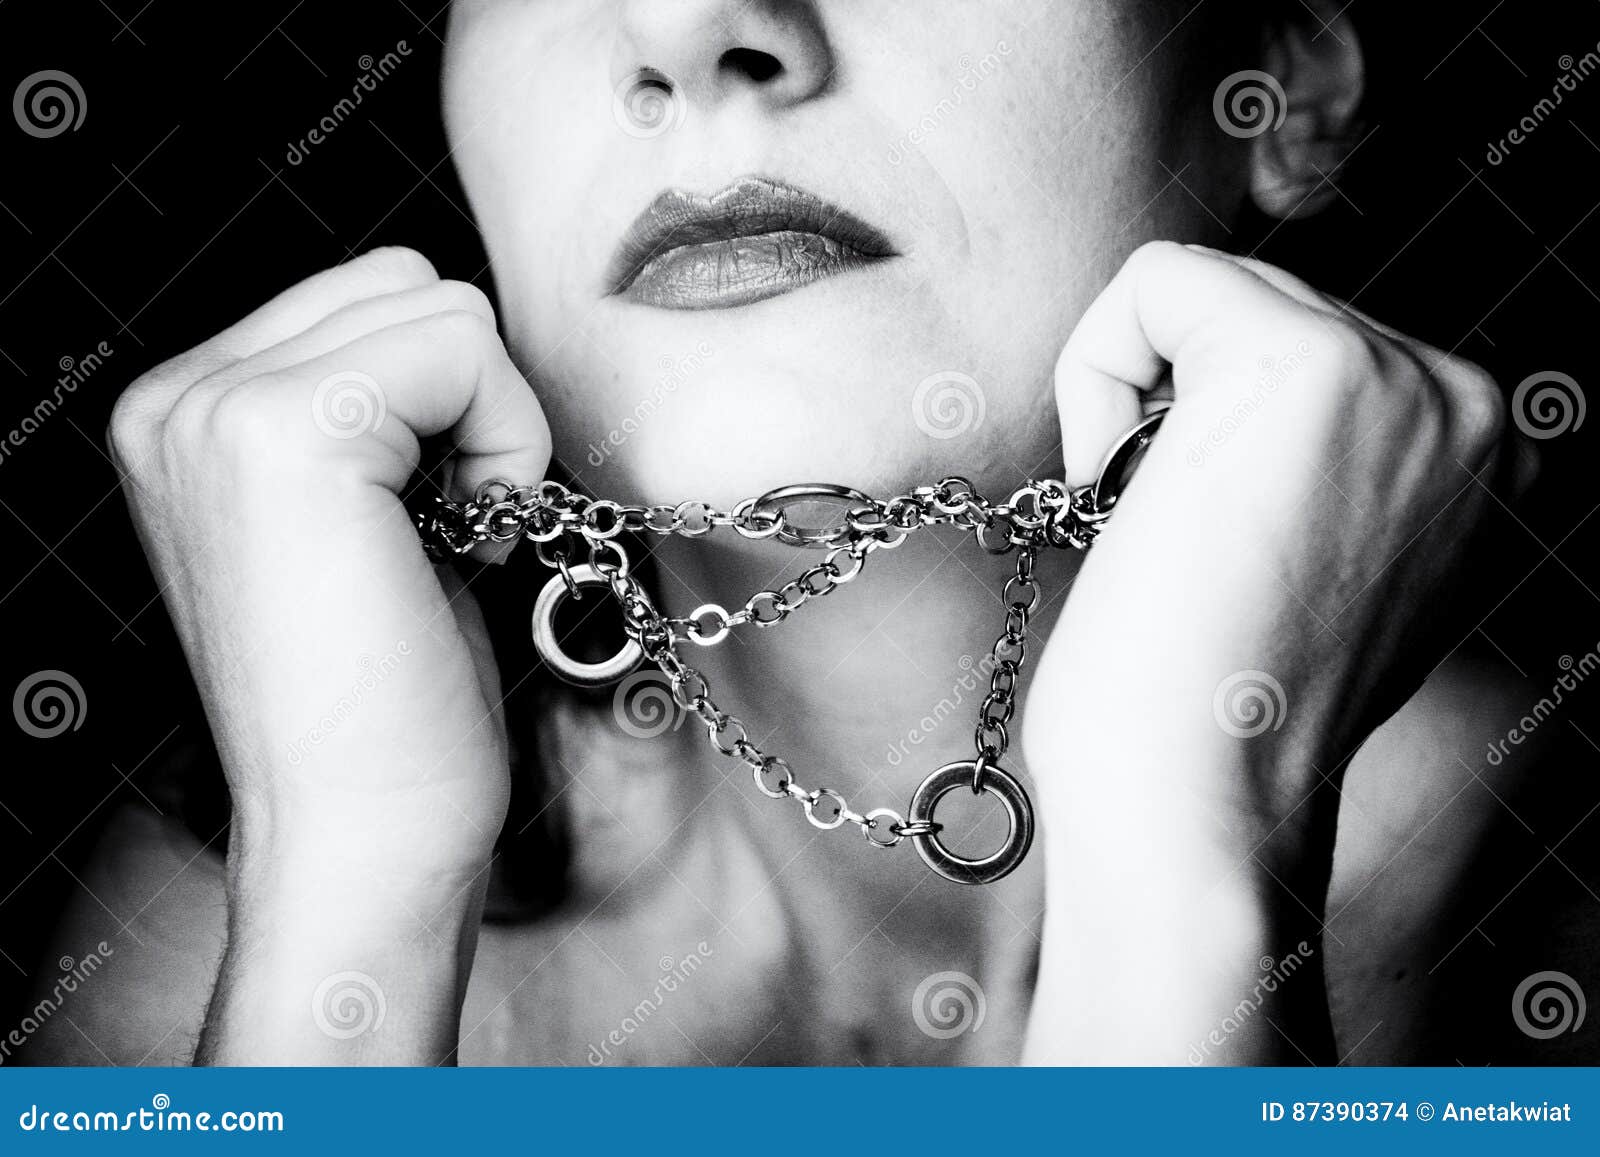 Woman in Chains' Photo 